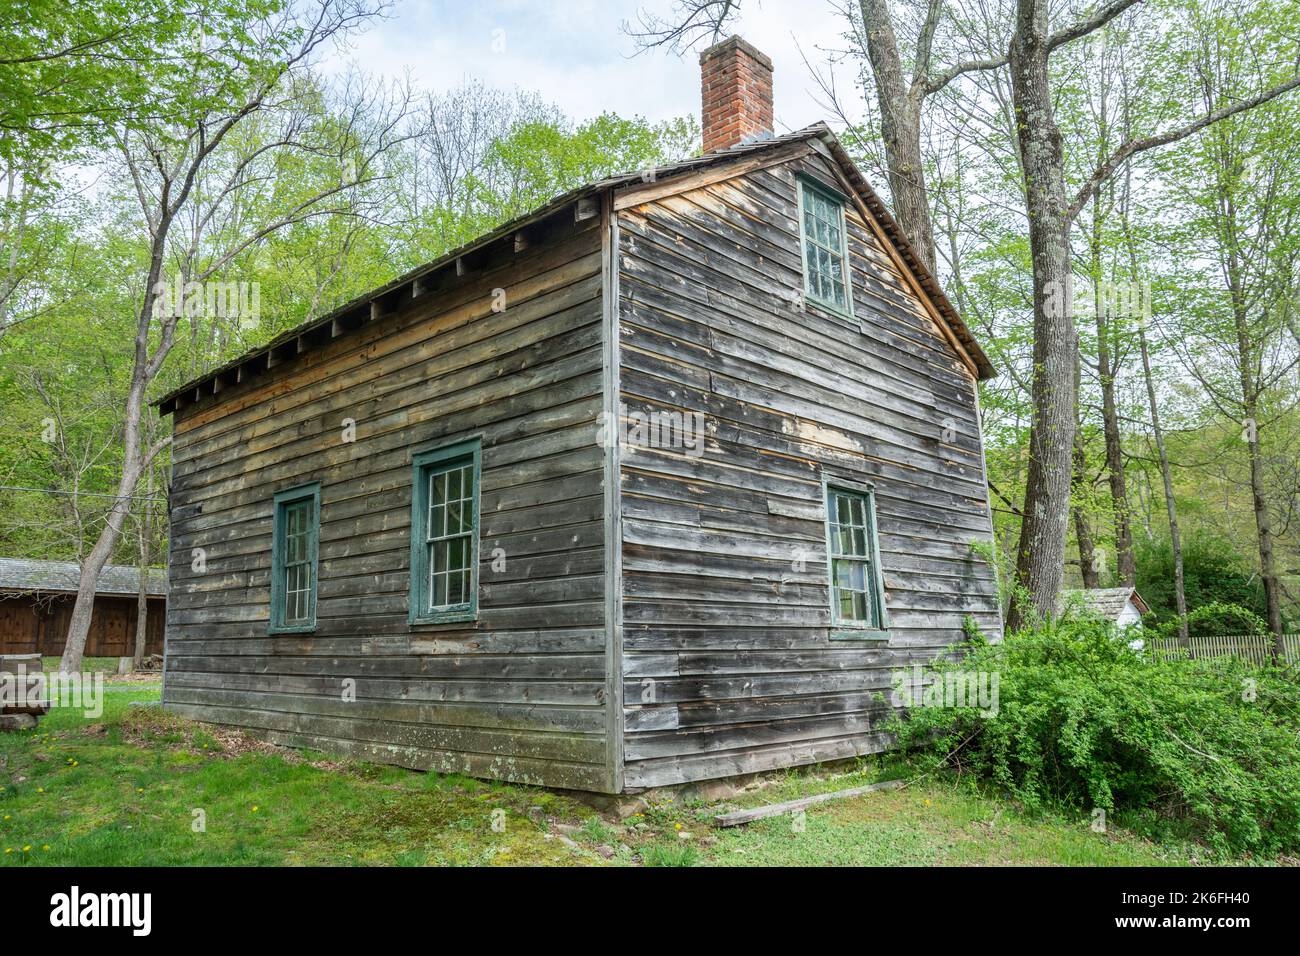 Hardwick, New Jersey, United States of America – May 1, 2017. Spangenberg Cabin at Millbrook village in Delaware Water Gap, NJ. The log cabin adjacent Stock Photo